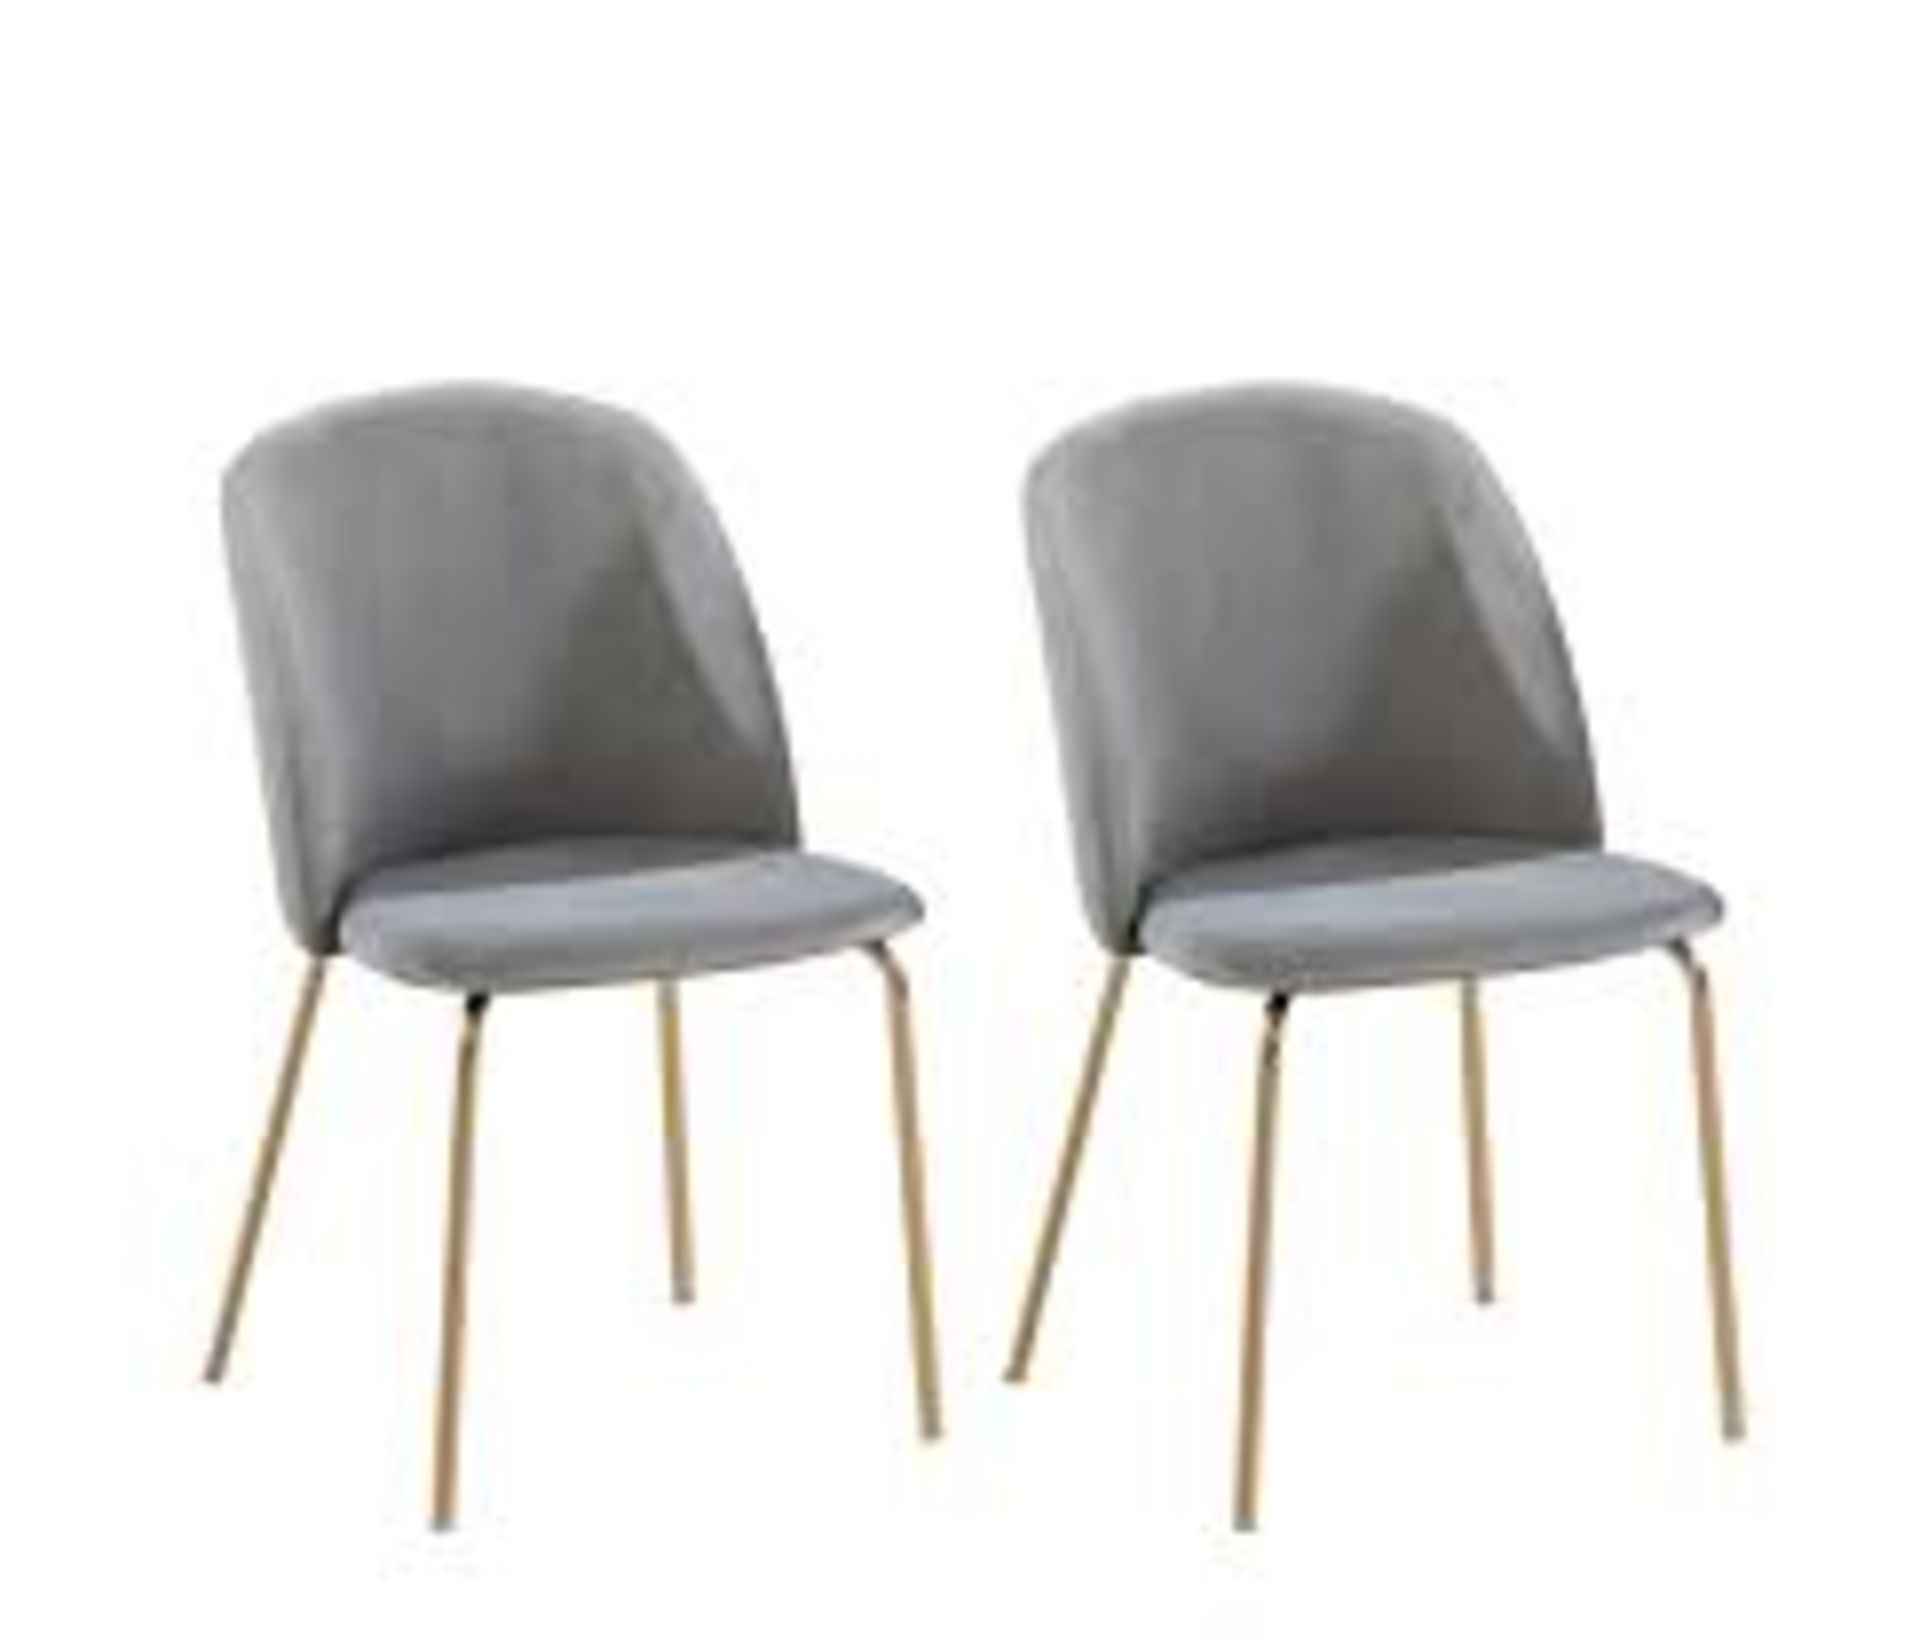 Boxed Set Of 2 Light Grey Leyland Designer Dining Chairs RRP £120 (18244) (Pictures Are For